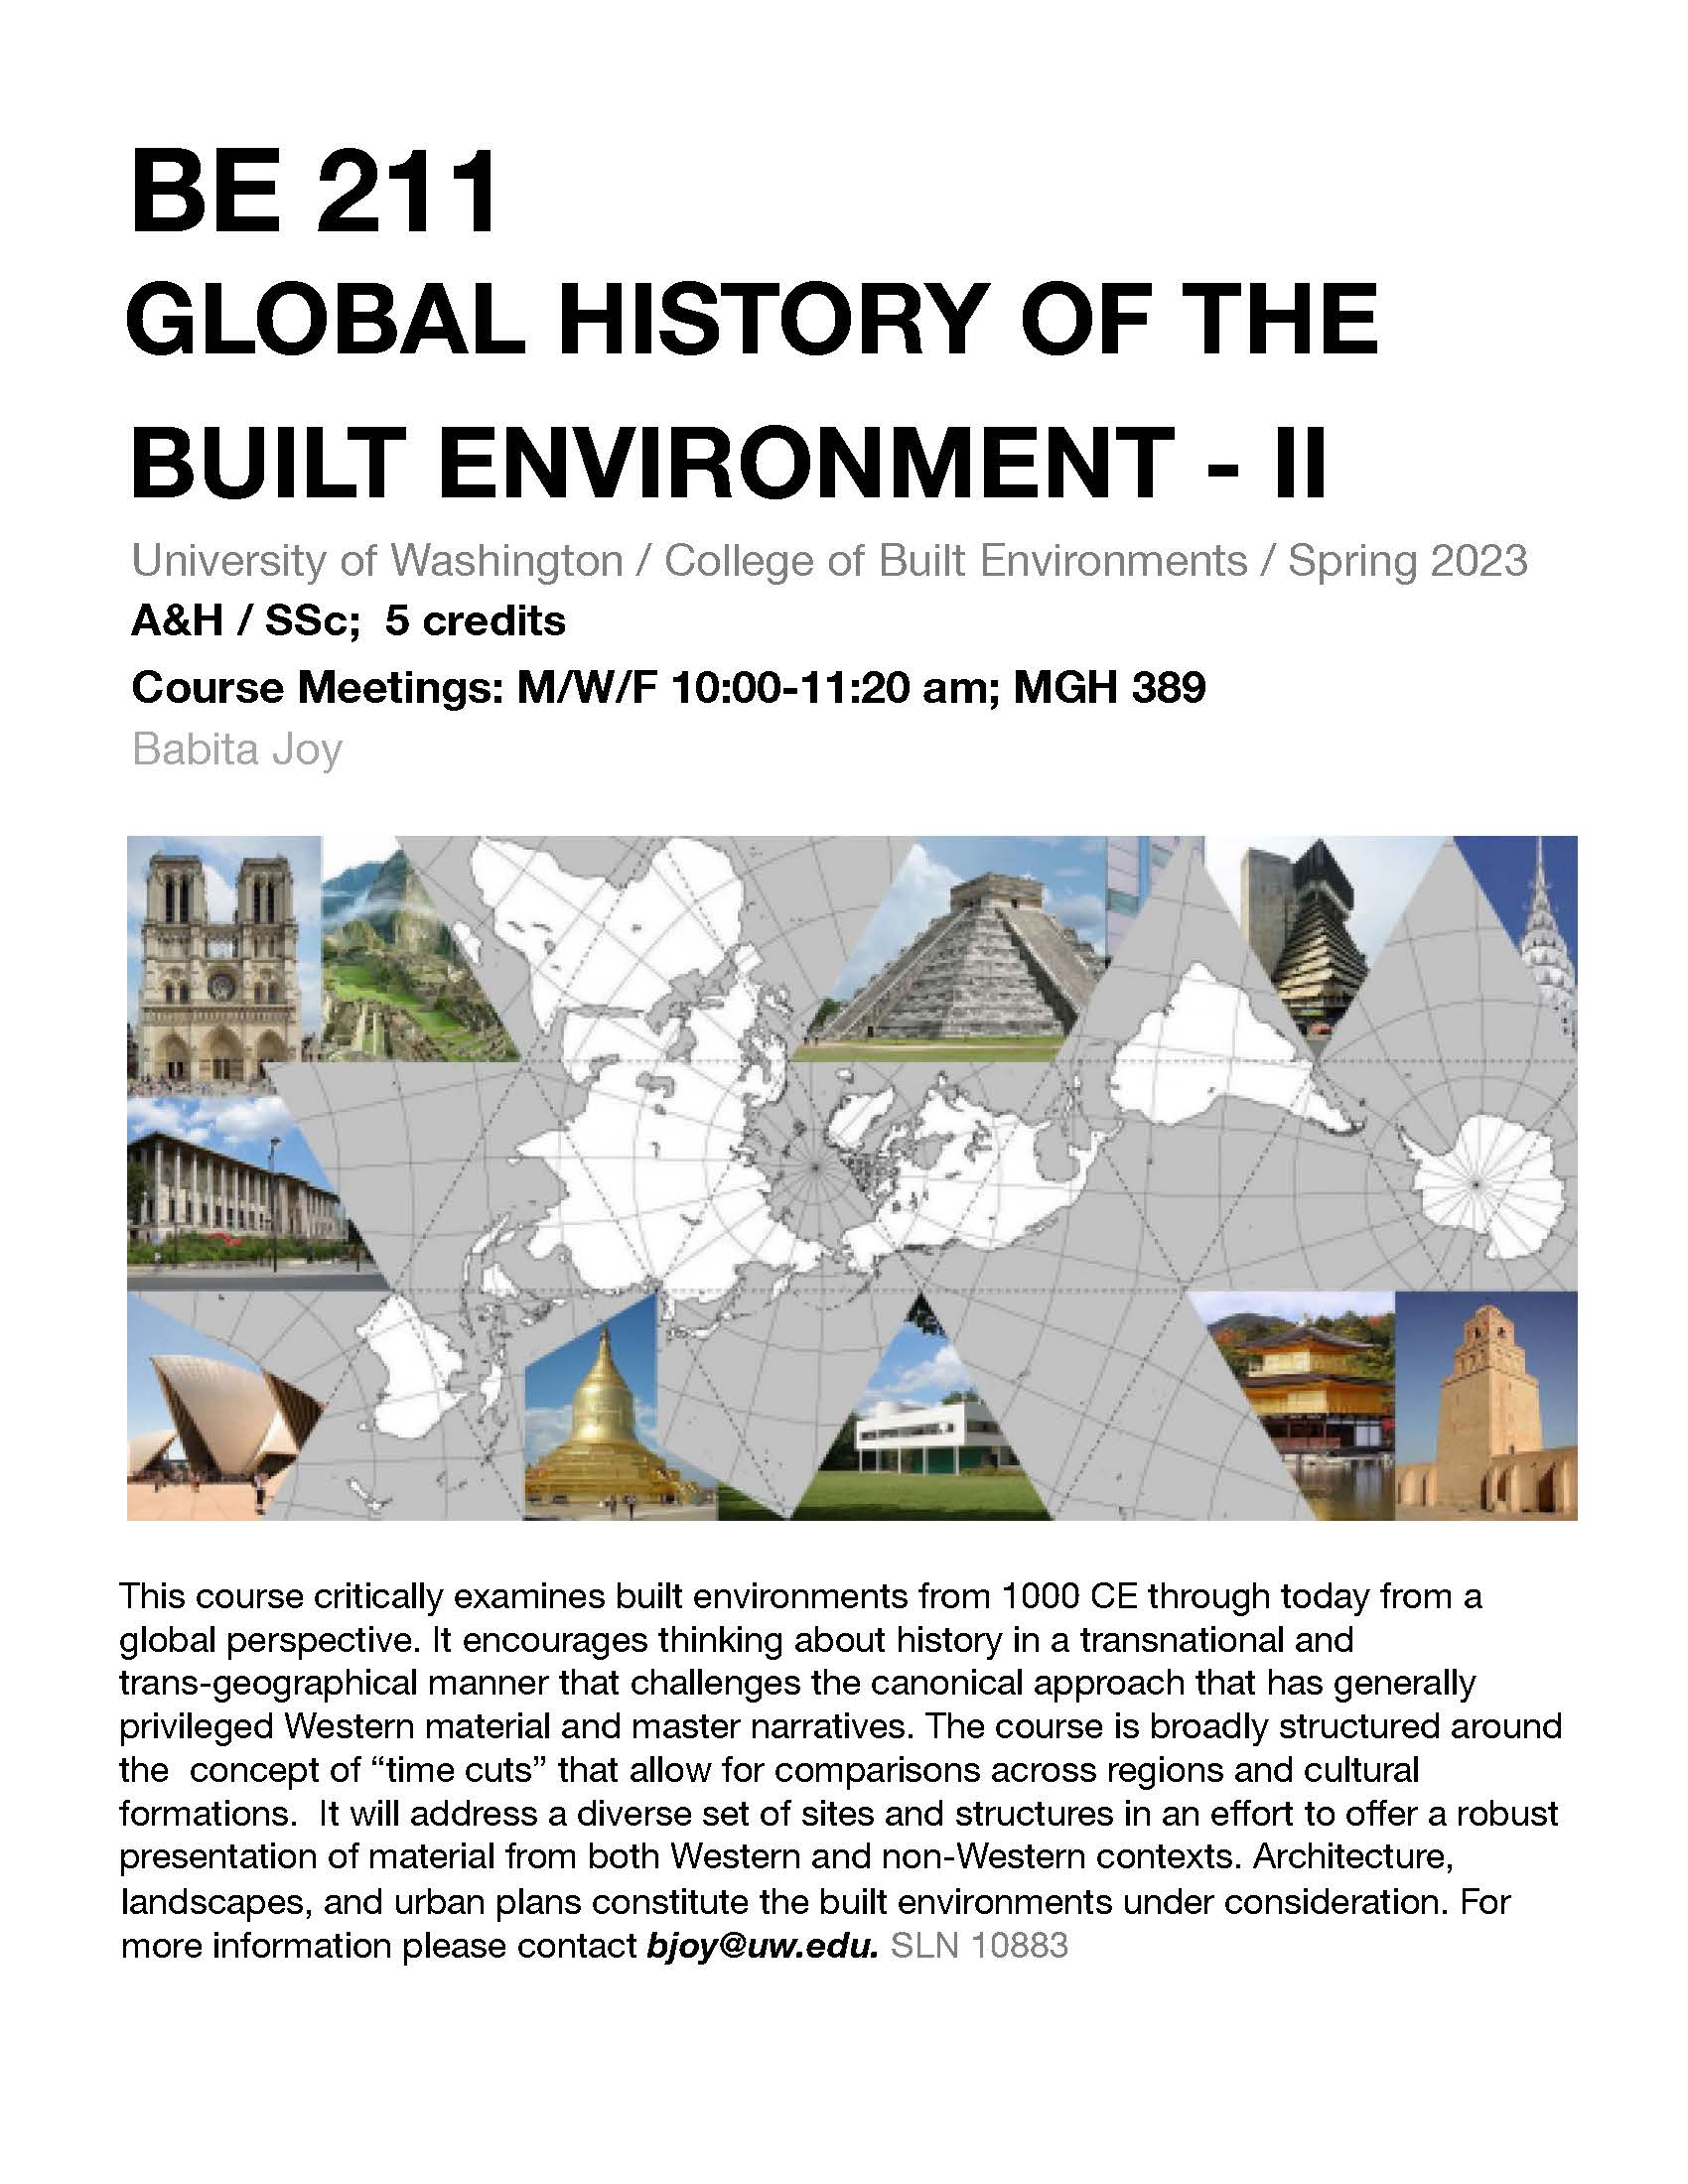 BE 211: Global History of the Built Environment